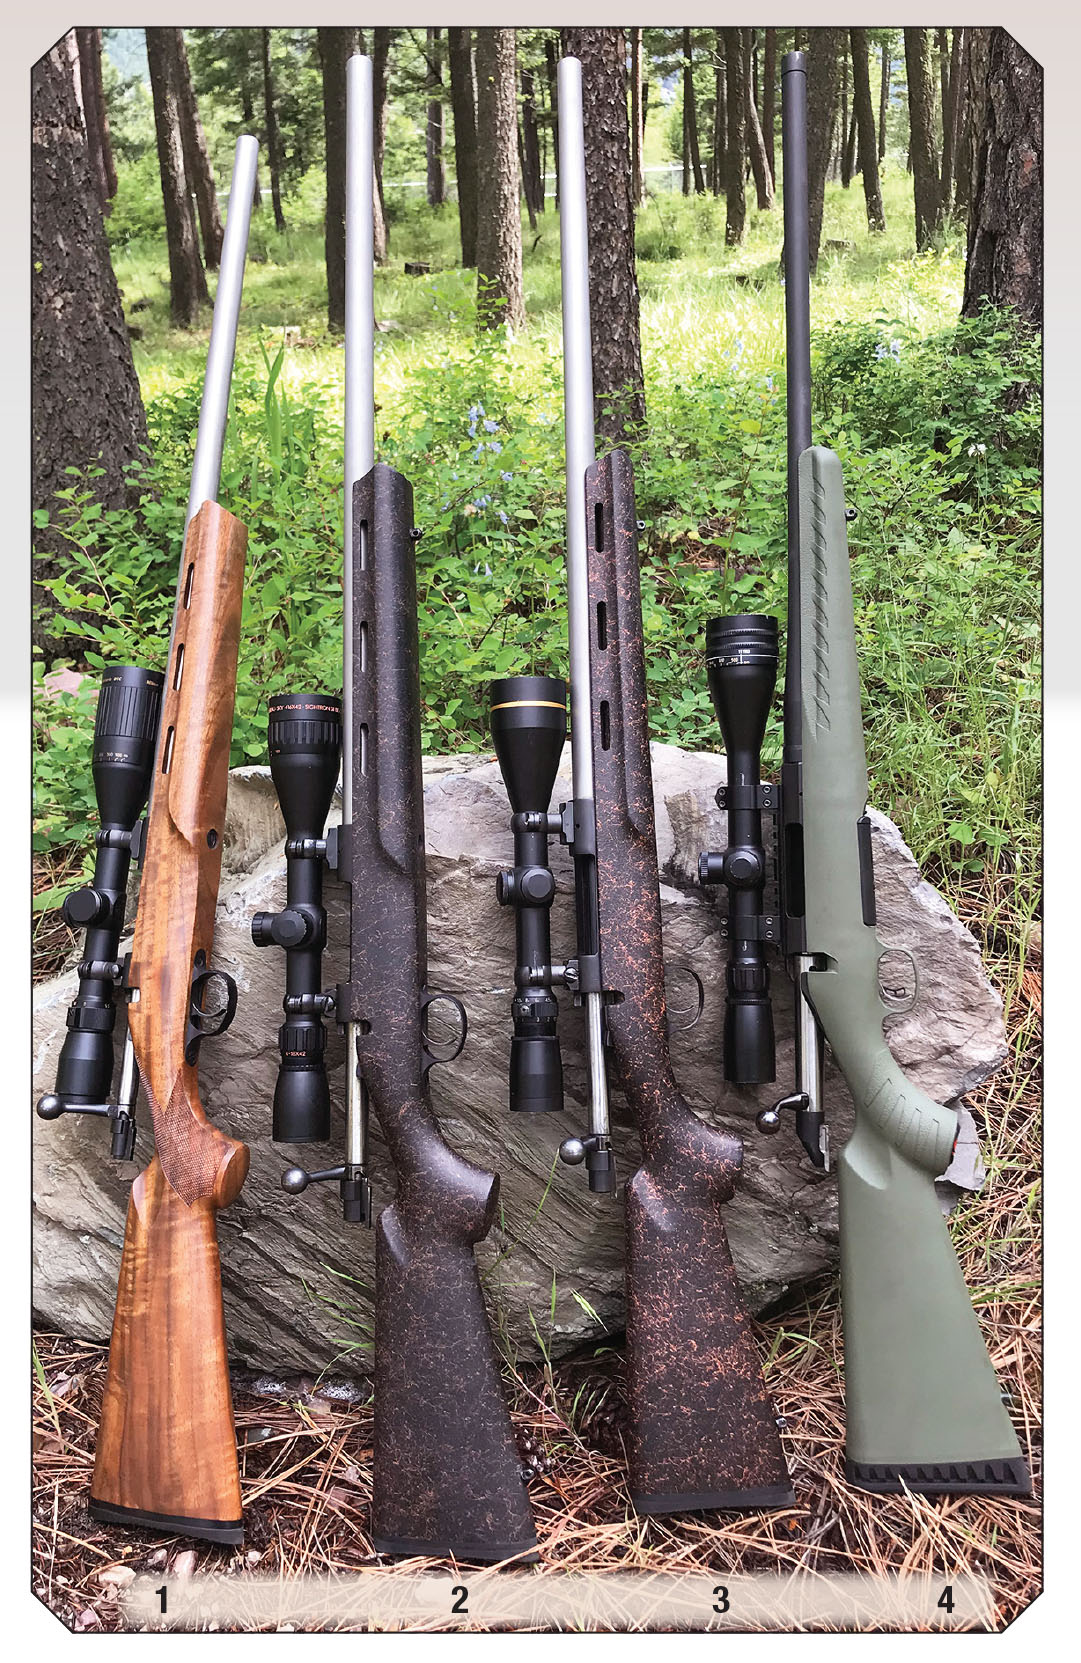 Four rifles used for testing cast bullets included a (1) Cooper Model 21 Varminter .223 Remington, (2) Cooper Model 22 Phoenix .22-250 Remington, (3) Cooper Model 22 Phoenix .243 Winchester and a (4) Ruger American Predator 6mm Creedmoor.